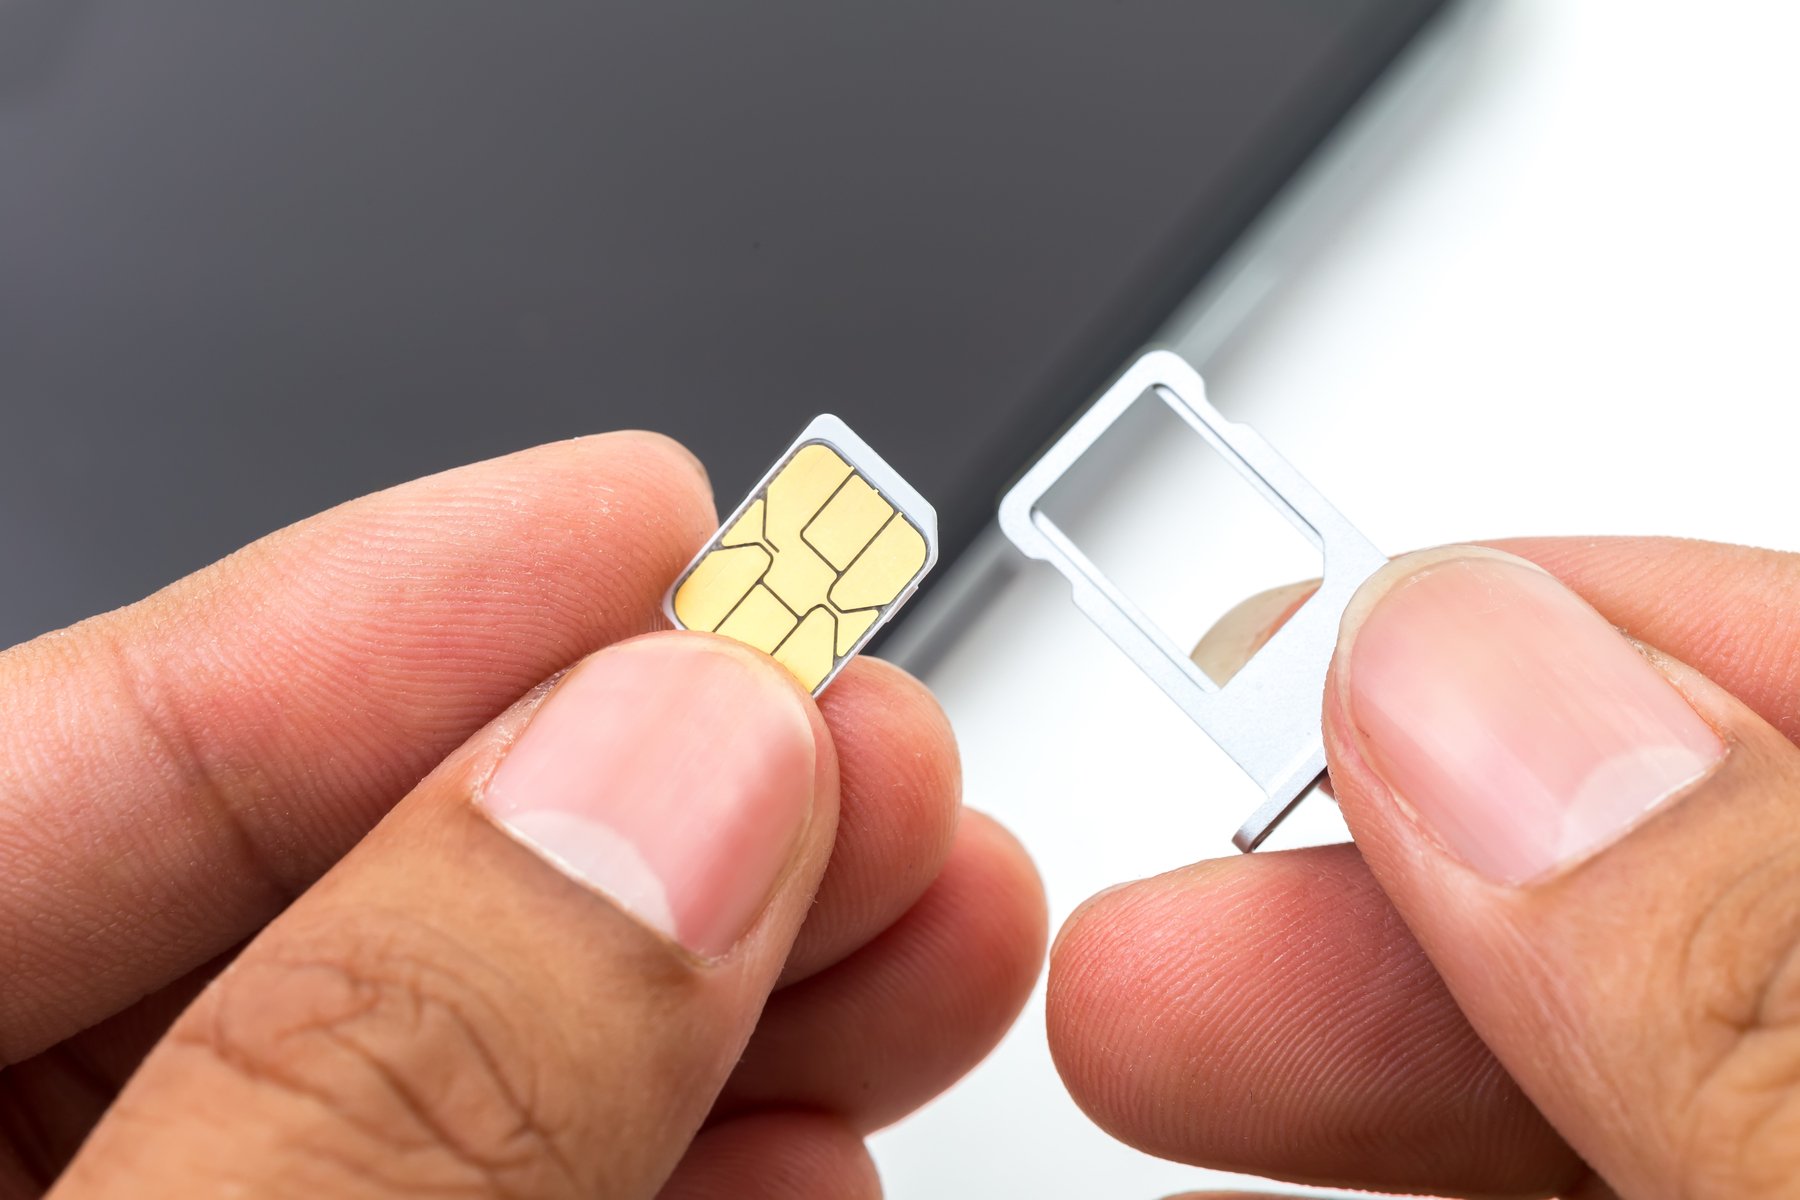 SIM cards and mobile phones in the UAE